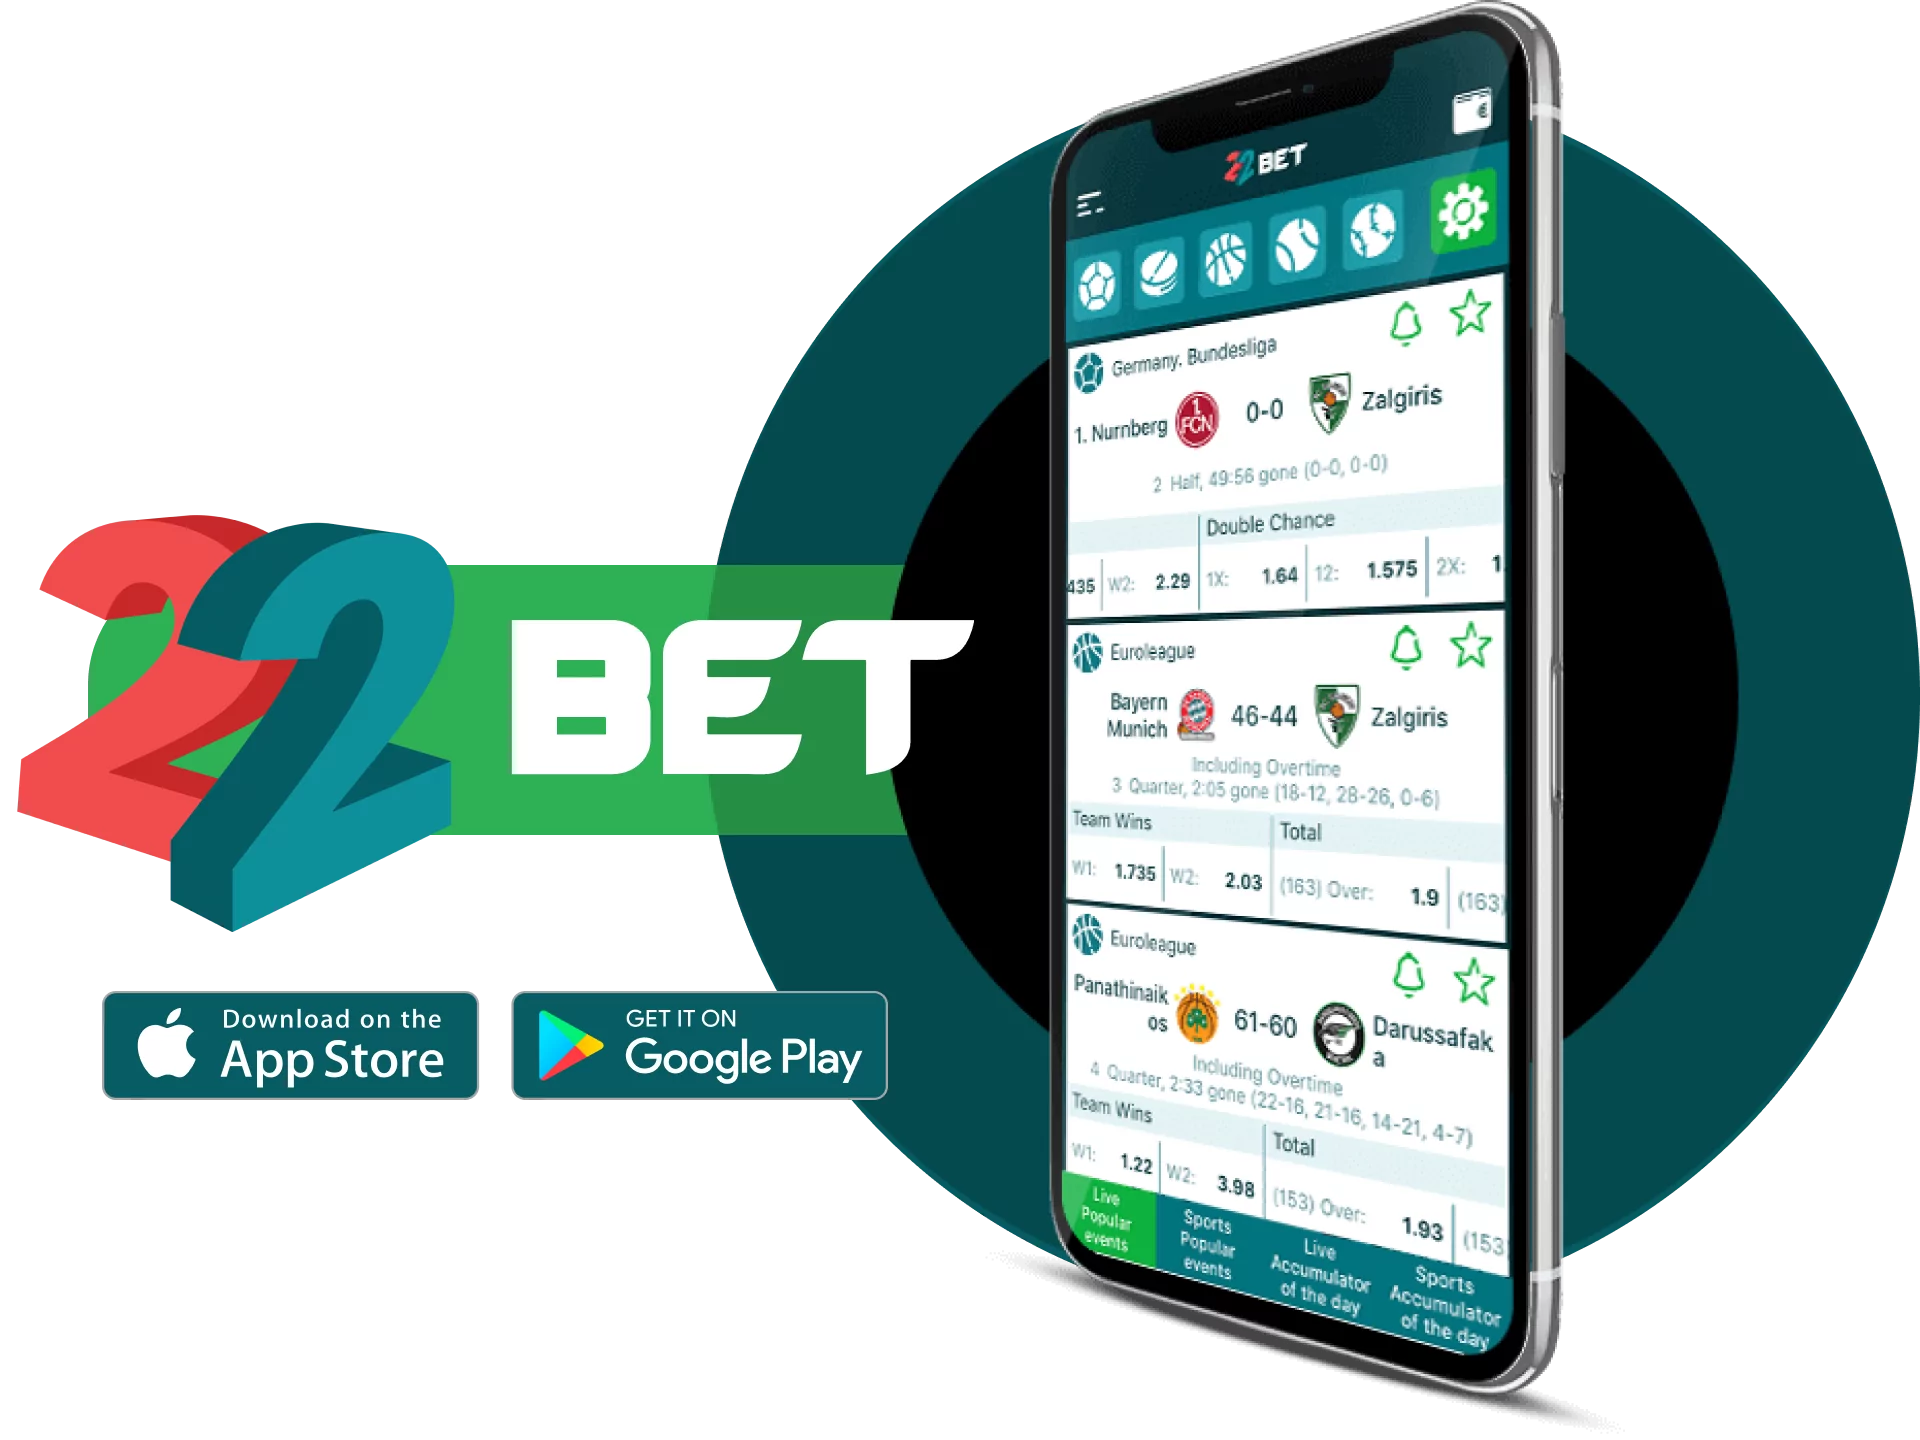 22BET bookie with a large number of football events.